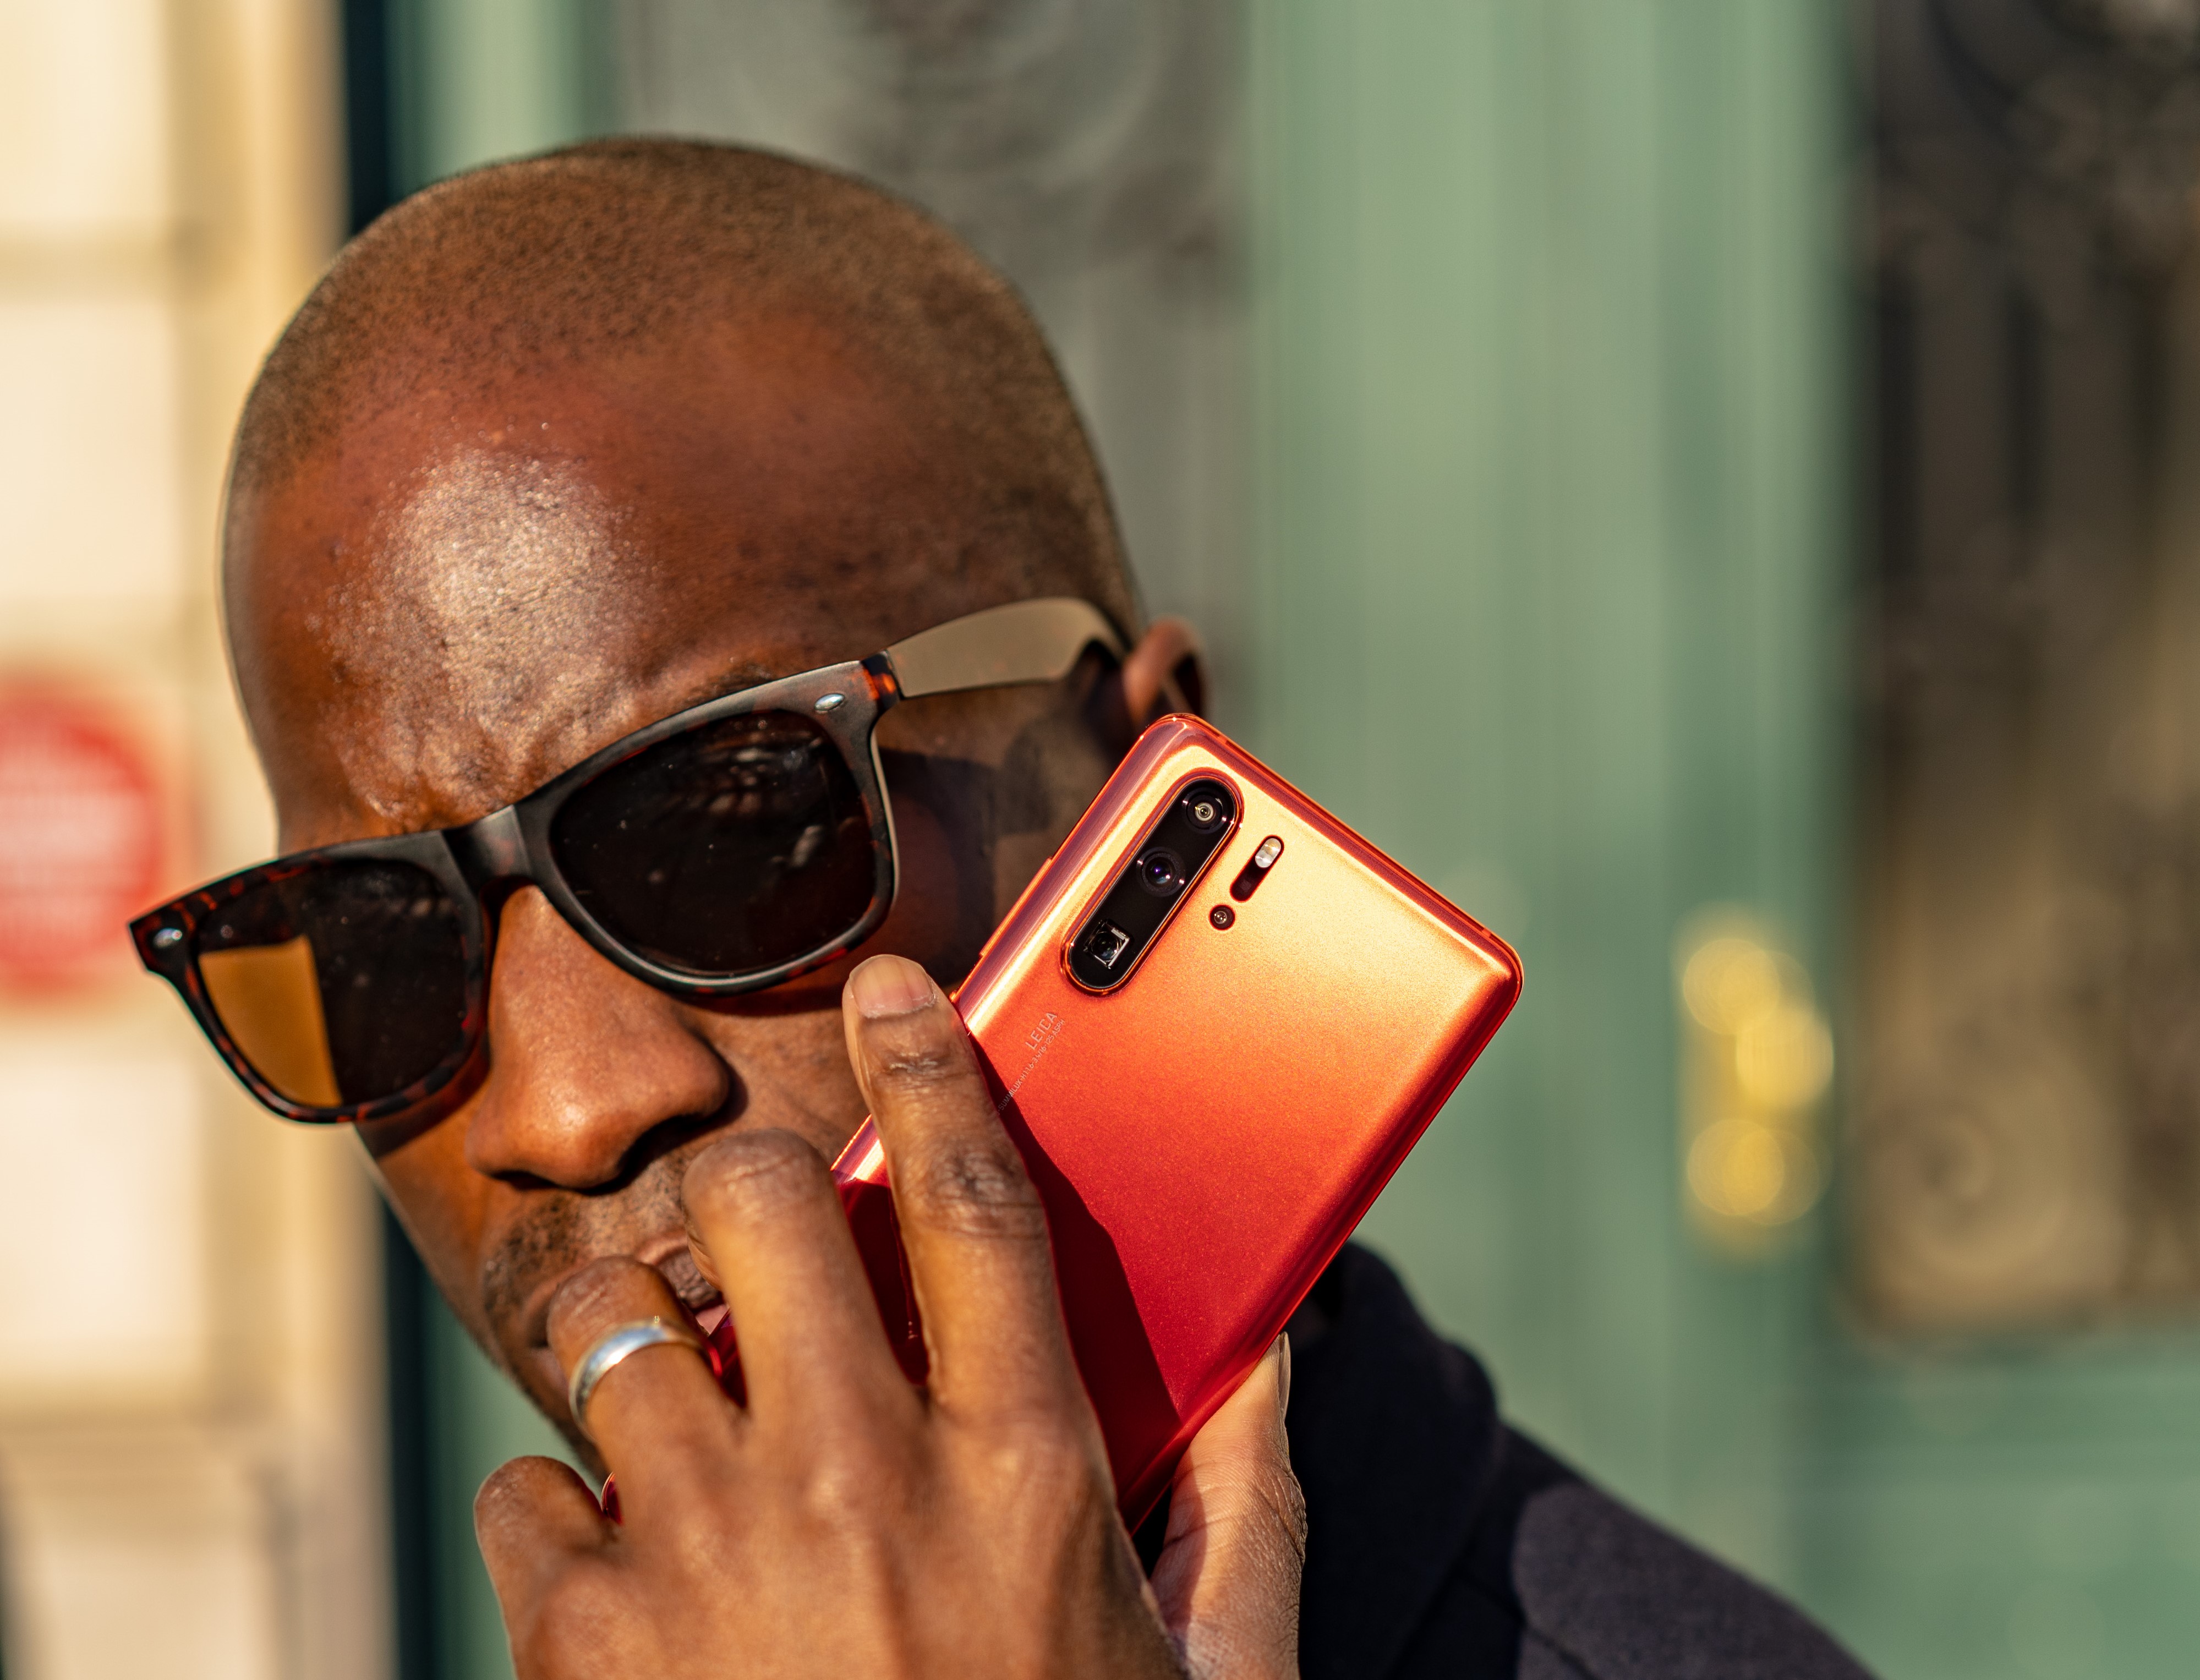 Hands on with the Huawei P30 Pro